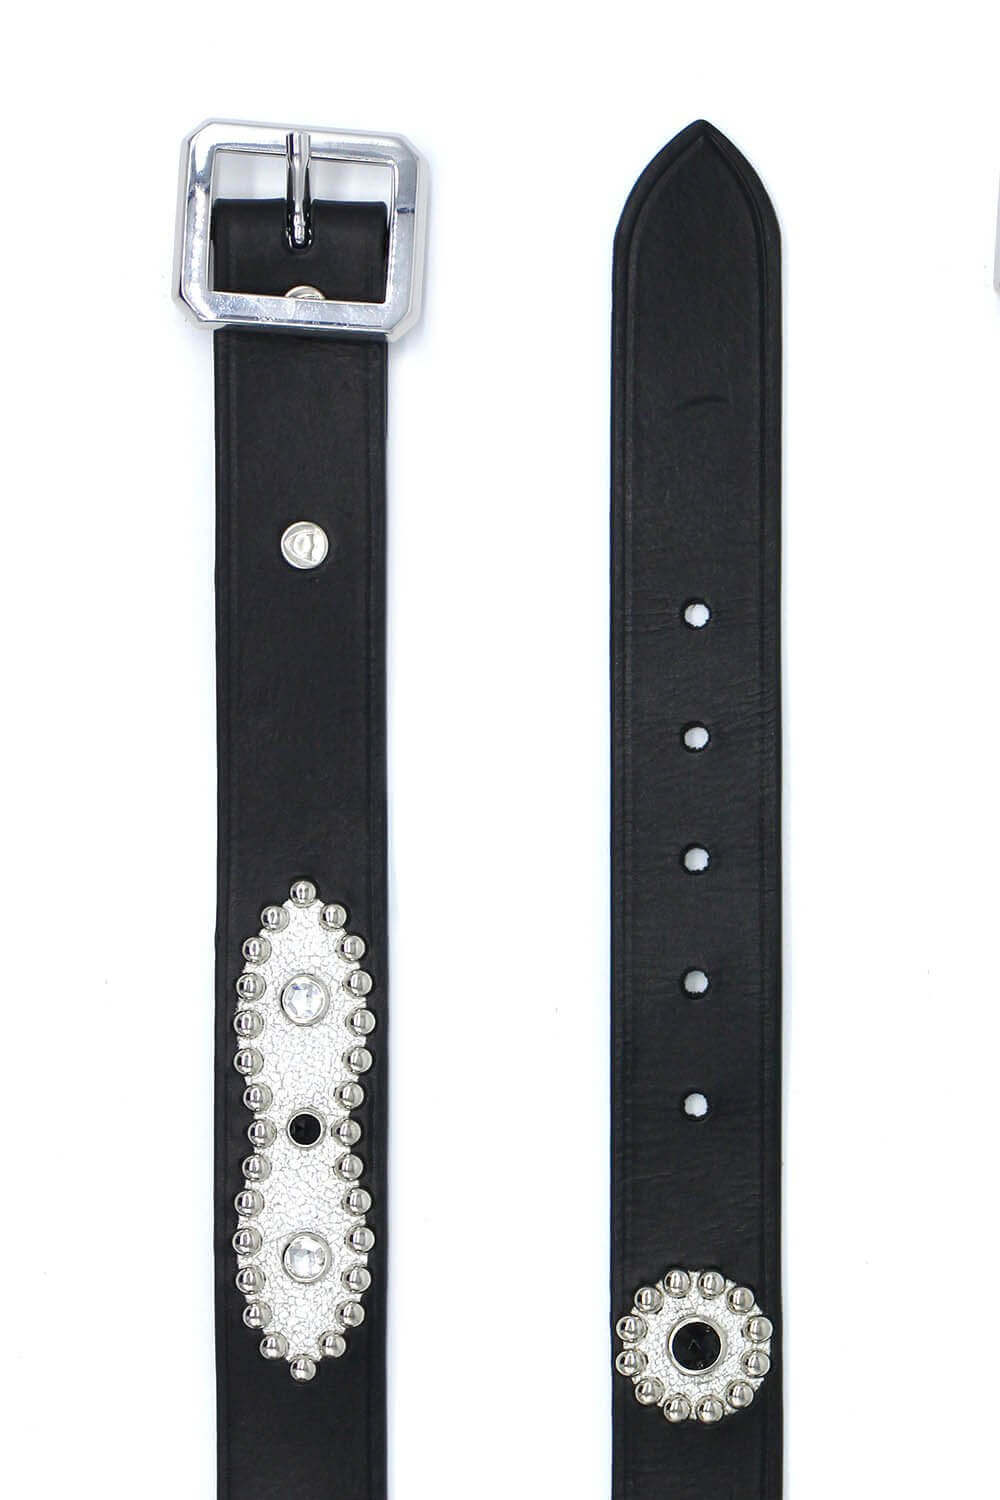 AMERICAN CRACKLE BELT Black leather belt with studs and rhinestones.Height: 3 cm. Made in Italy. HTC LOS ANGELES